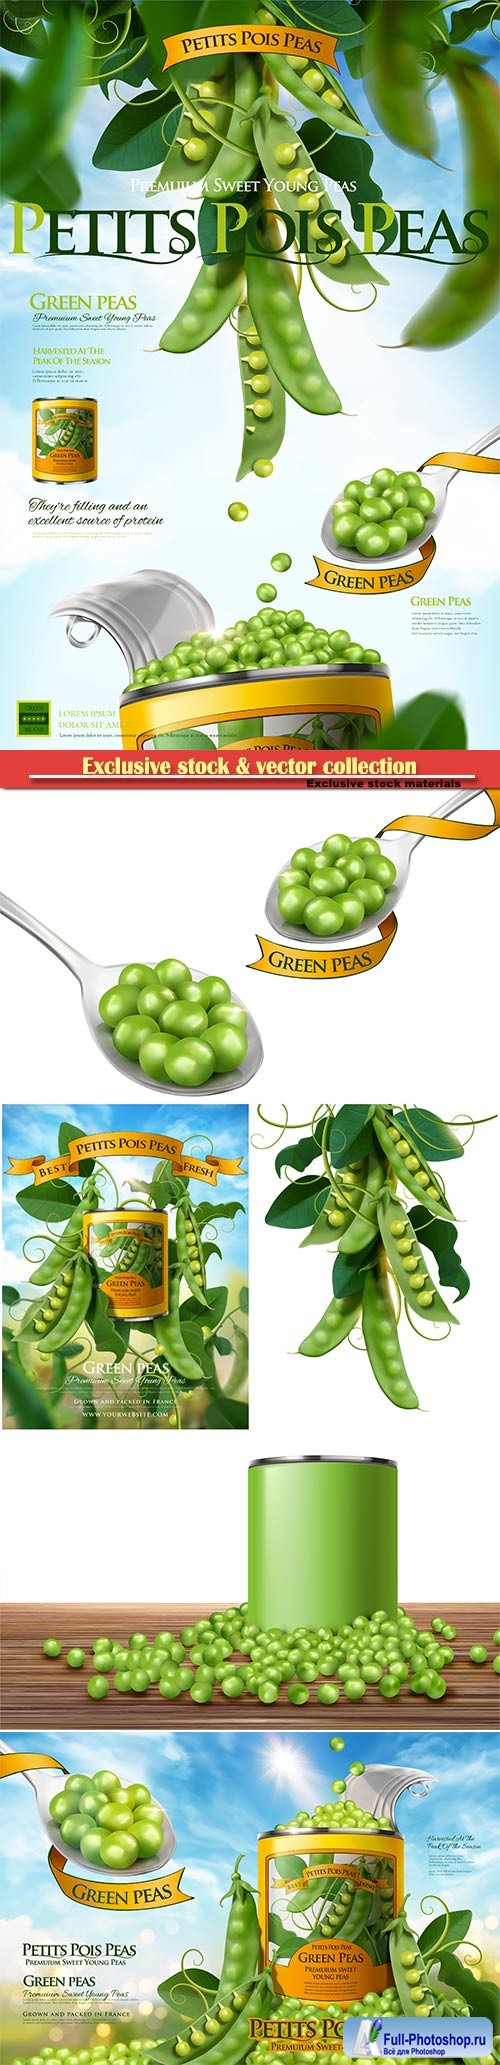 Canned young peas ads poster with fresh plant in 3d vector illustration